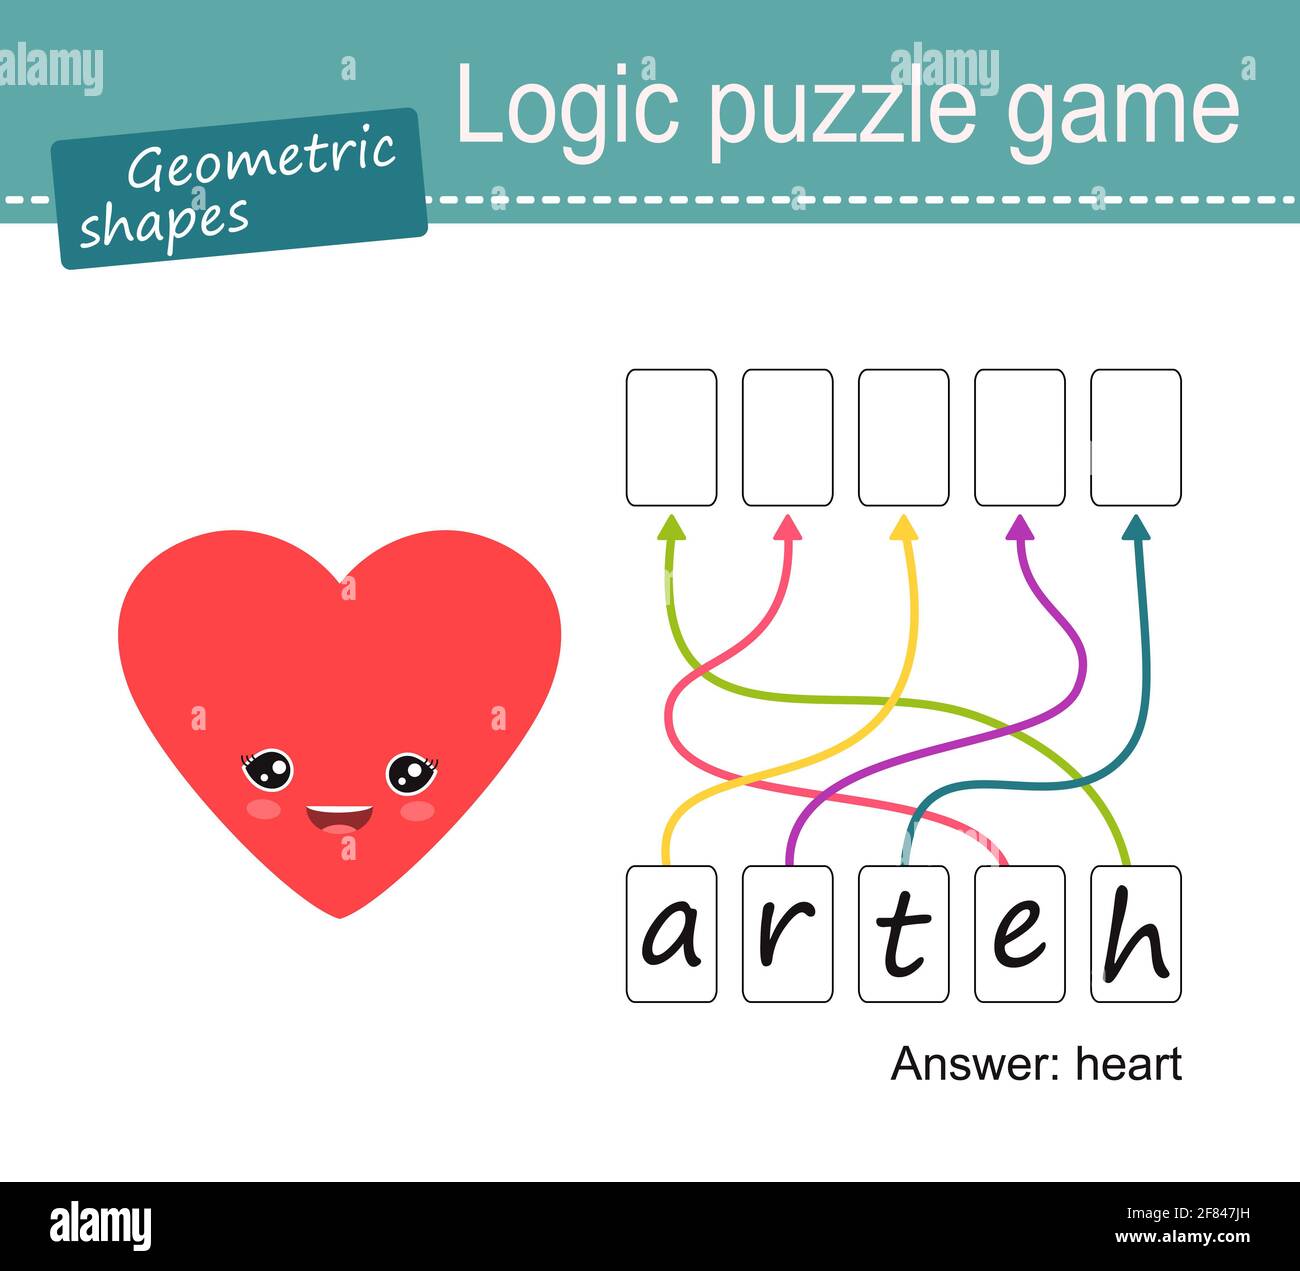 Logic puzzle game for children. Geometric shapes, heart. Cartoon flat style. Vector illustration Stock Photo